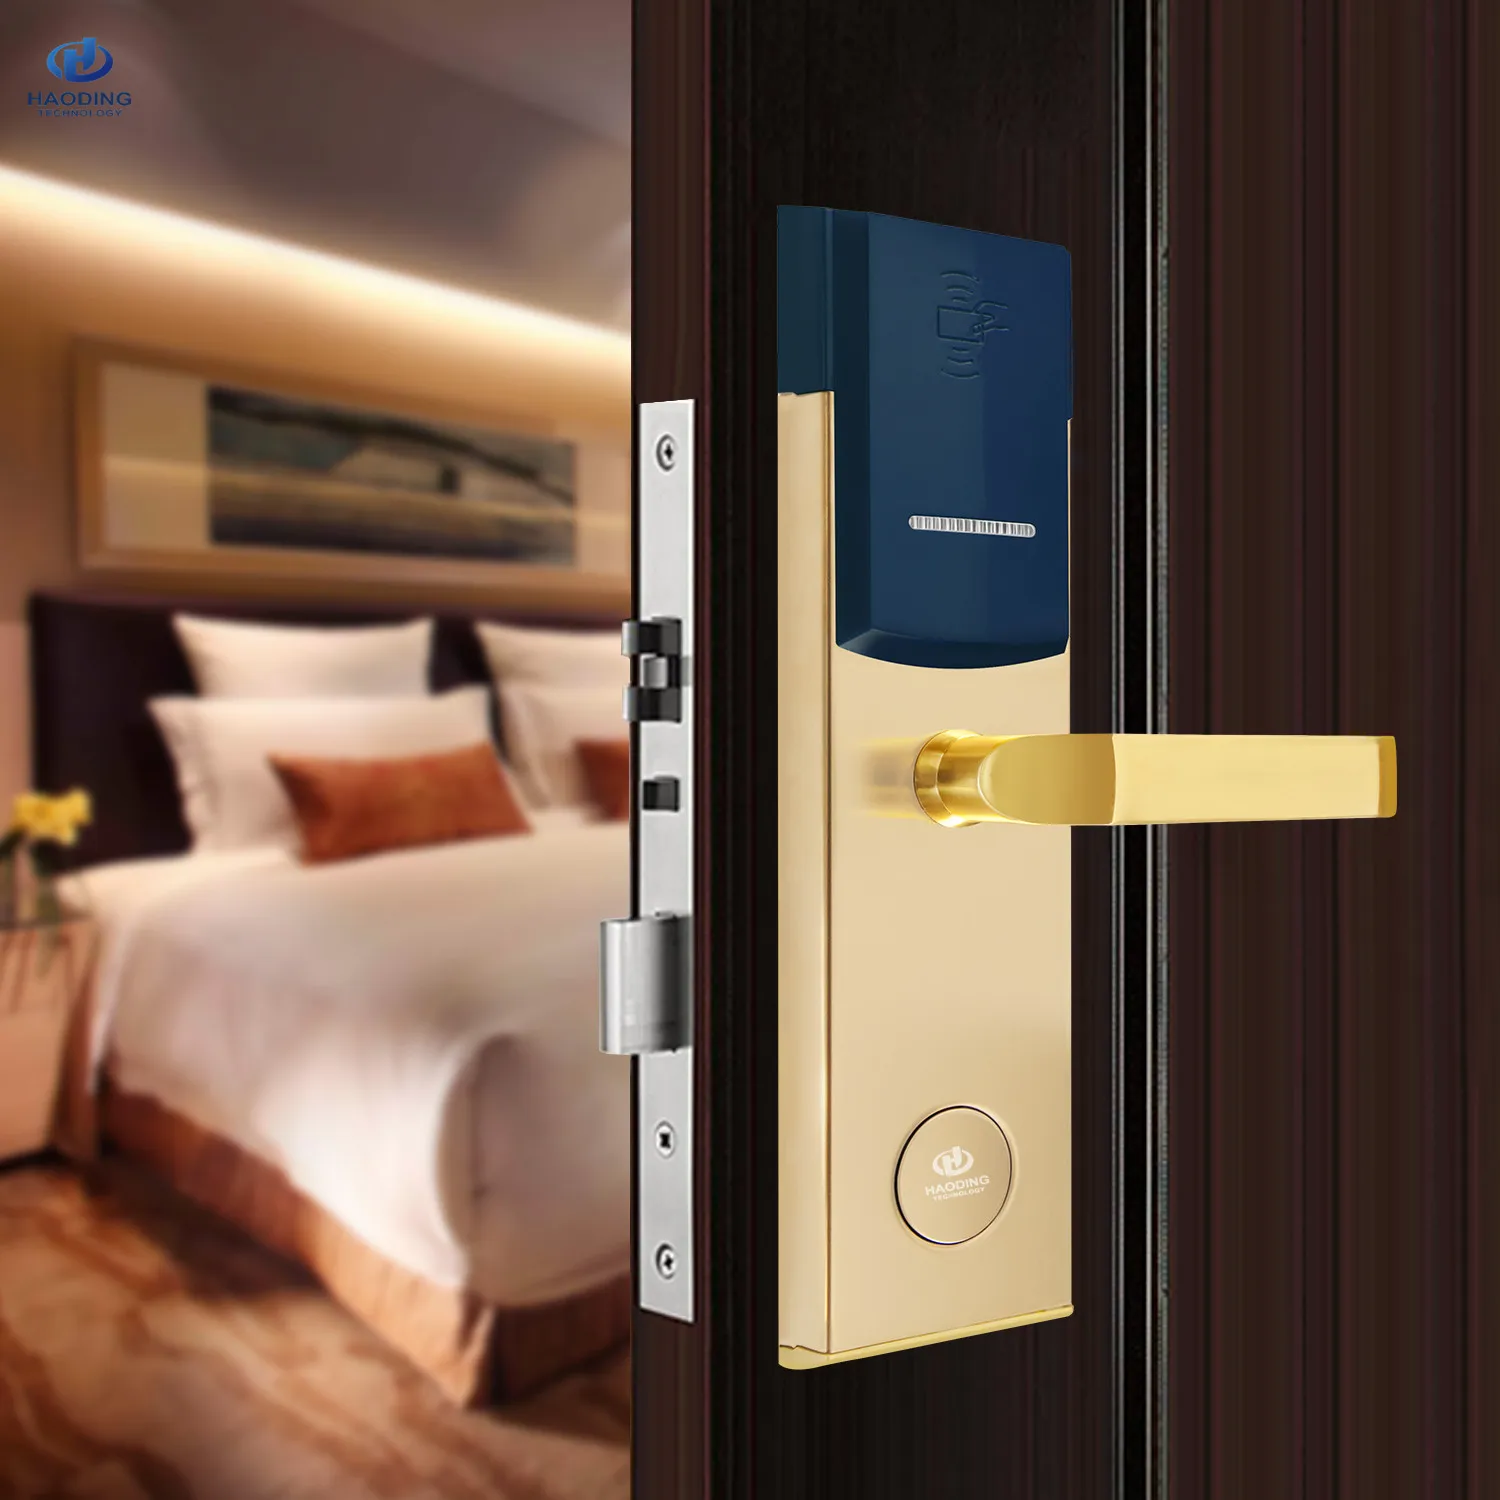 stainless steel smart hotel rifd lock keycard door lock system with api